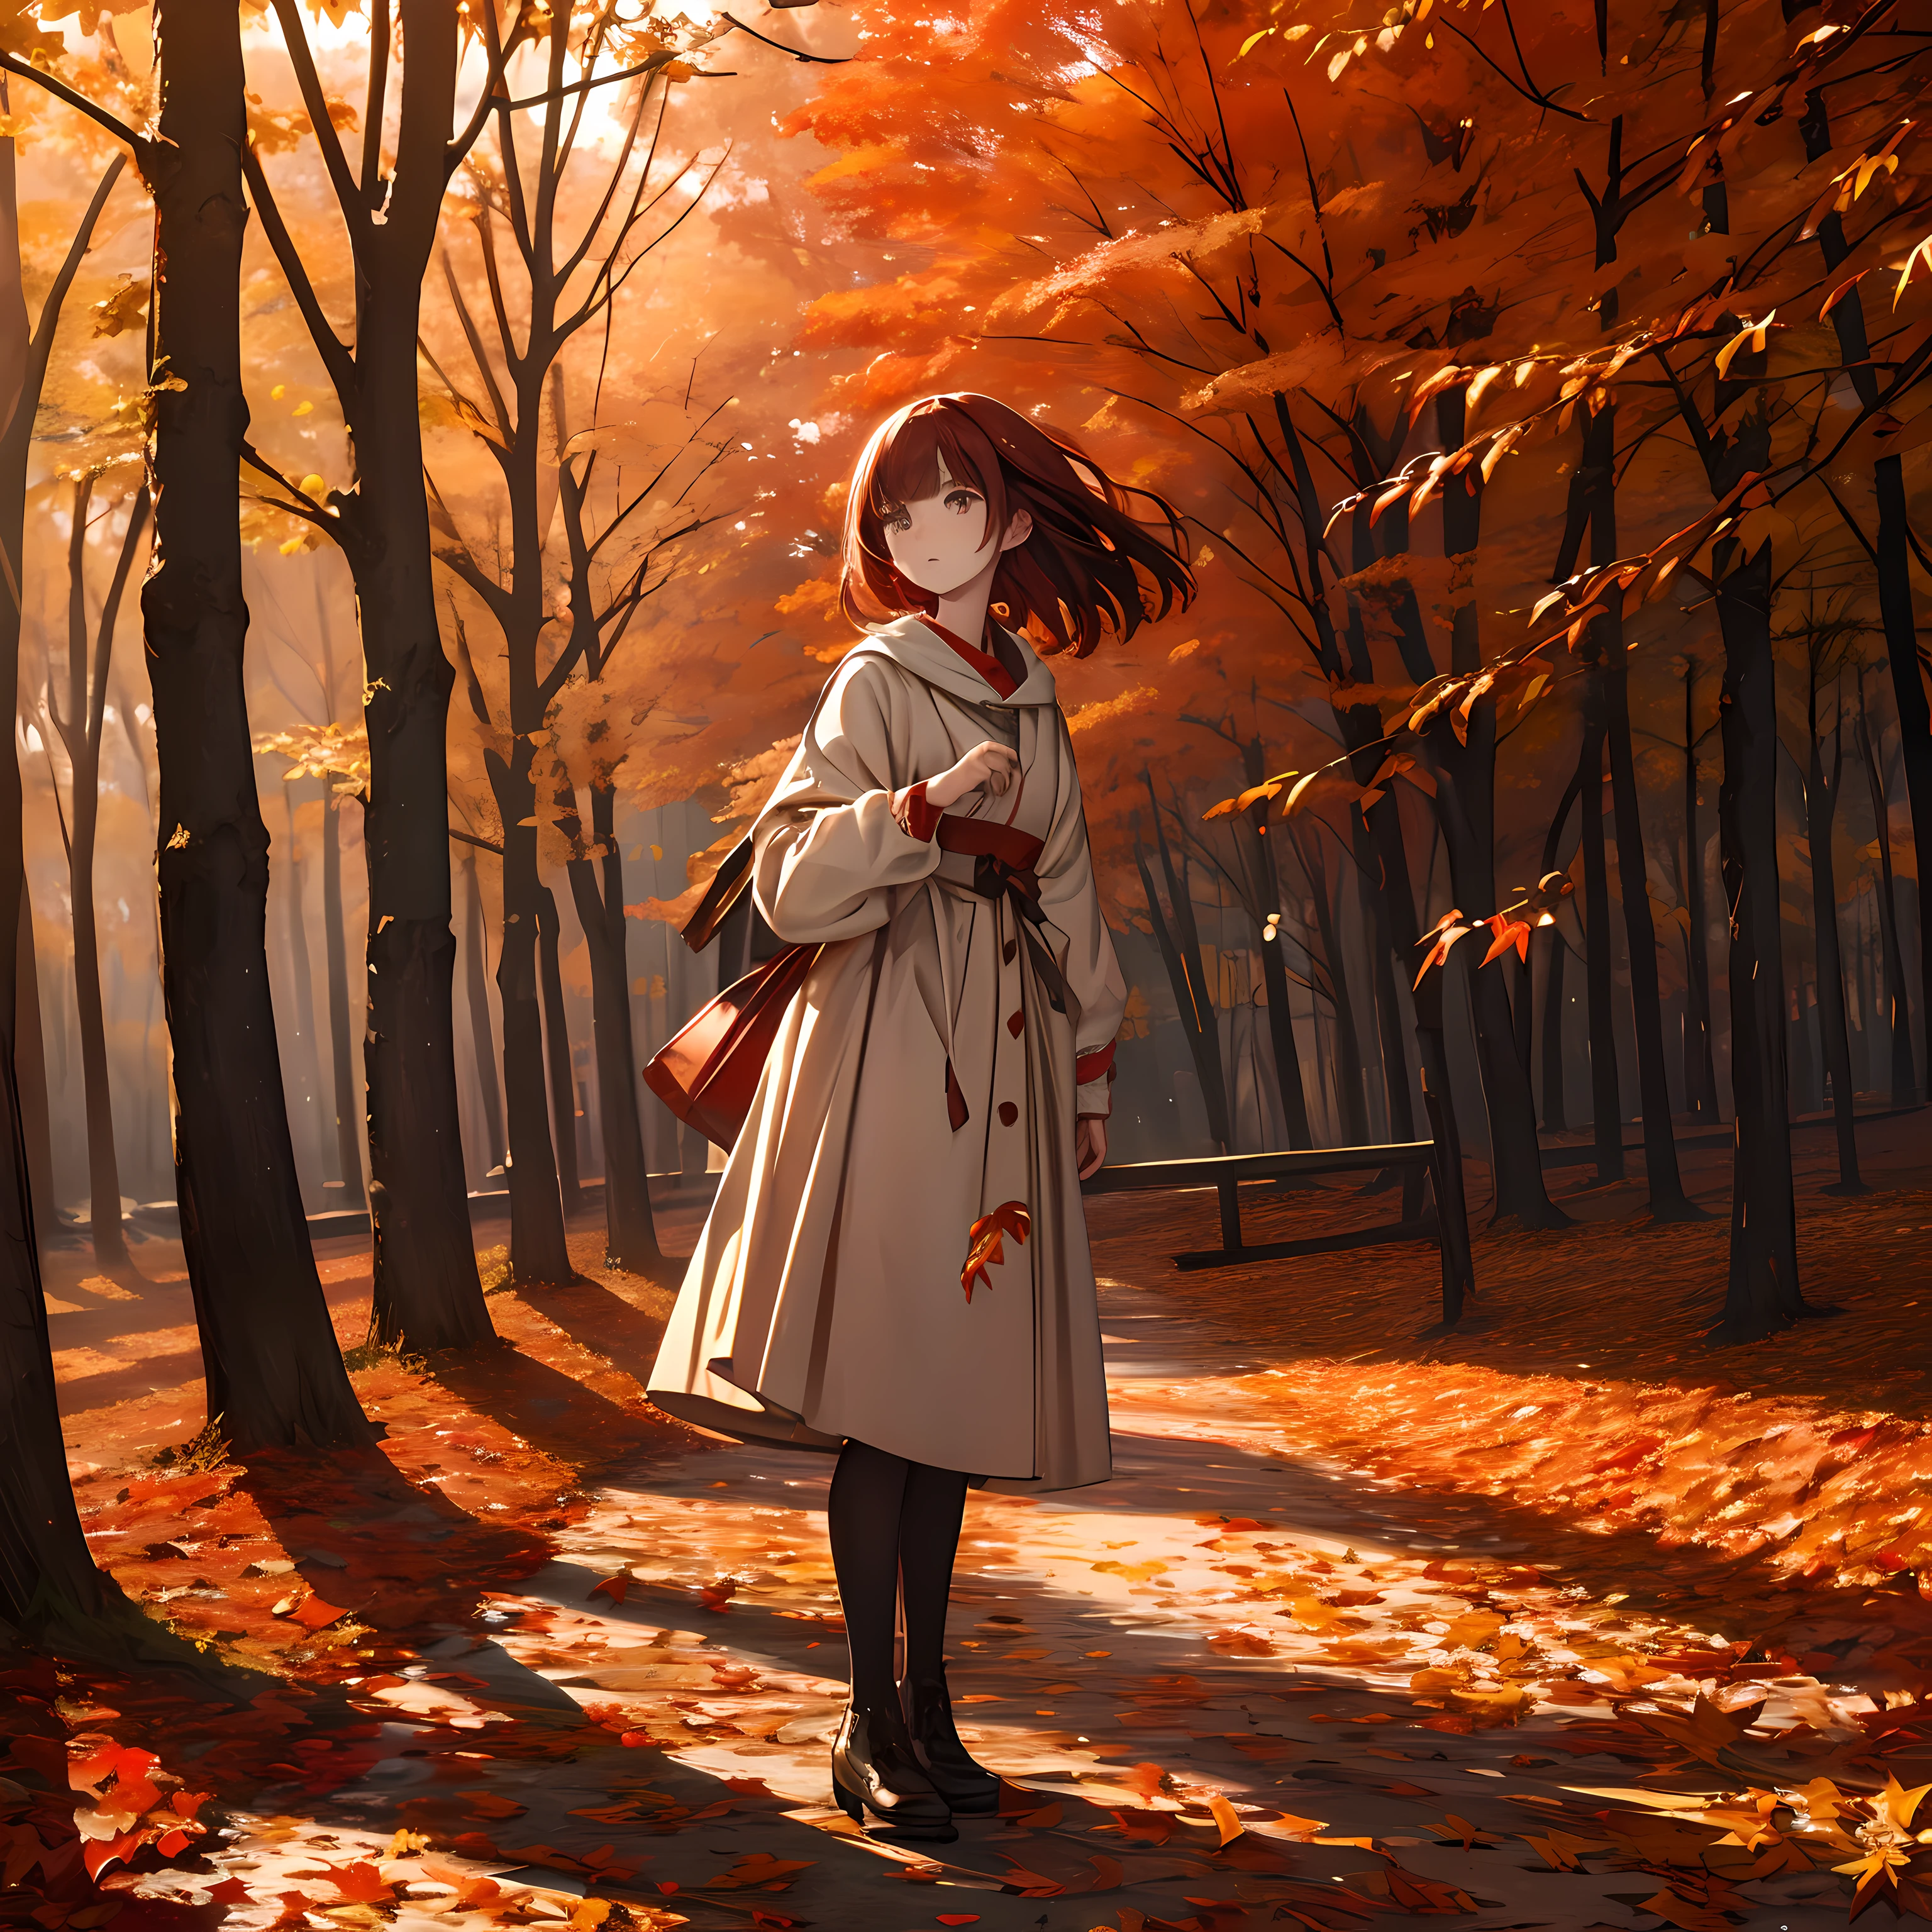 A masterpiece, high resolution, bright red autumn leaves waiting in the wind, a standing girl, delicate and detailed writing.